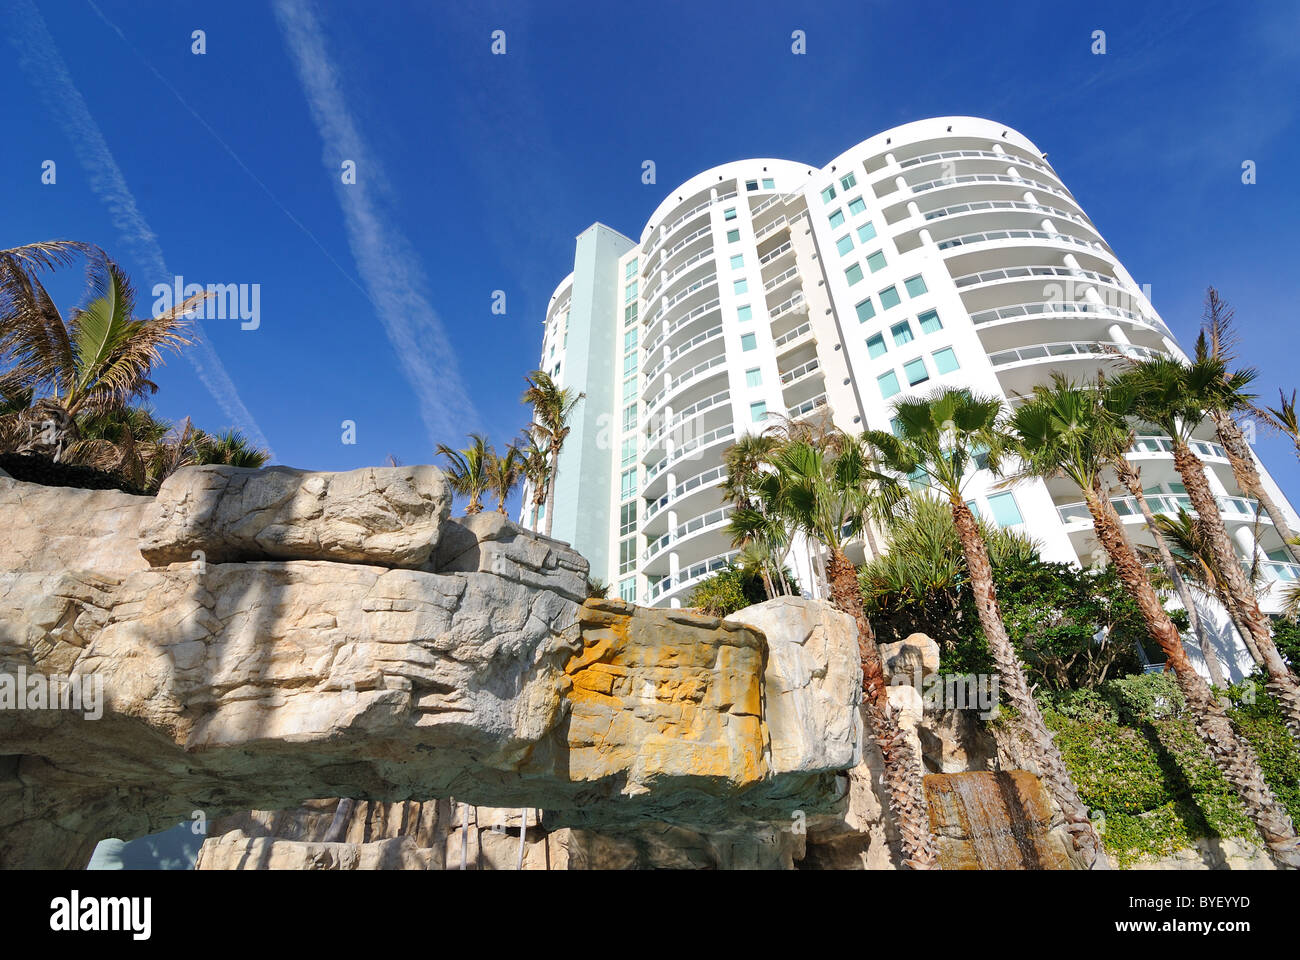 Tropical resort with rock caves and palm trees Stock Photo